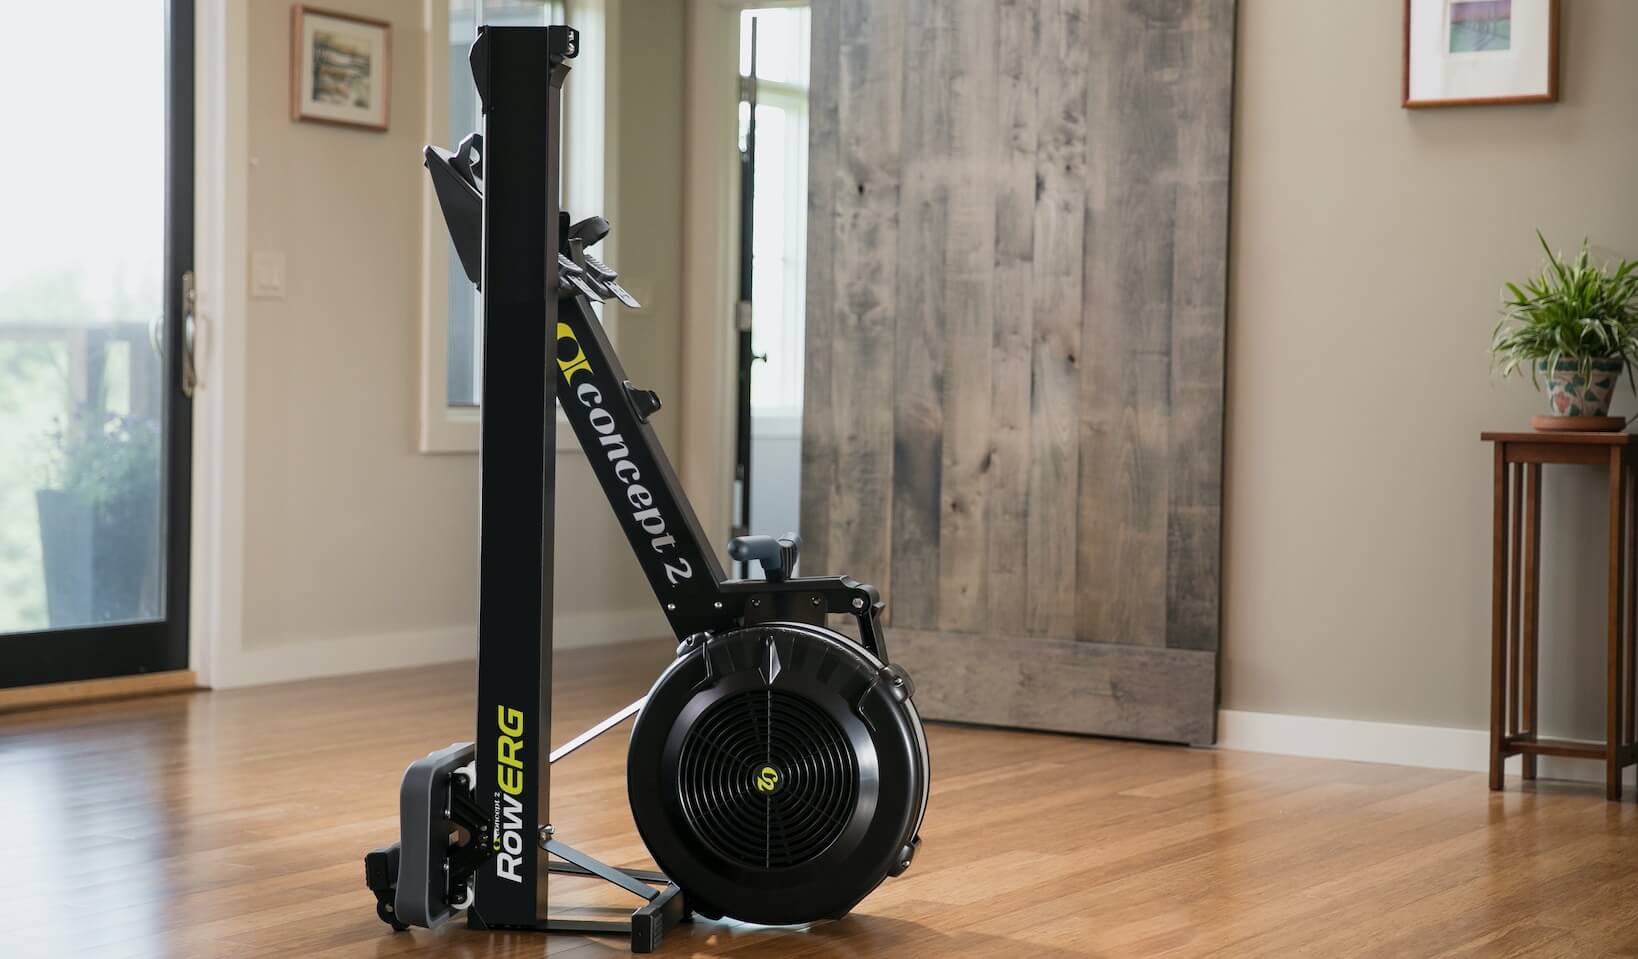 The concept2 model d that we review